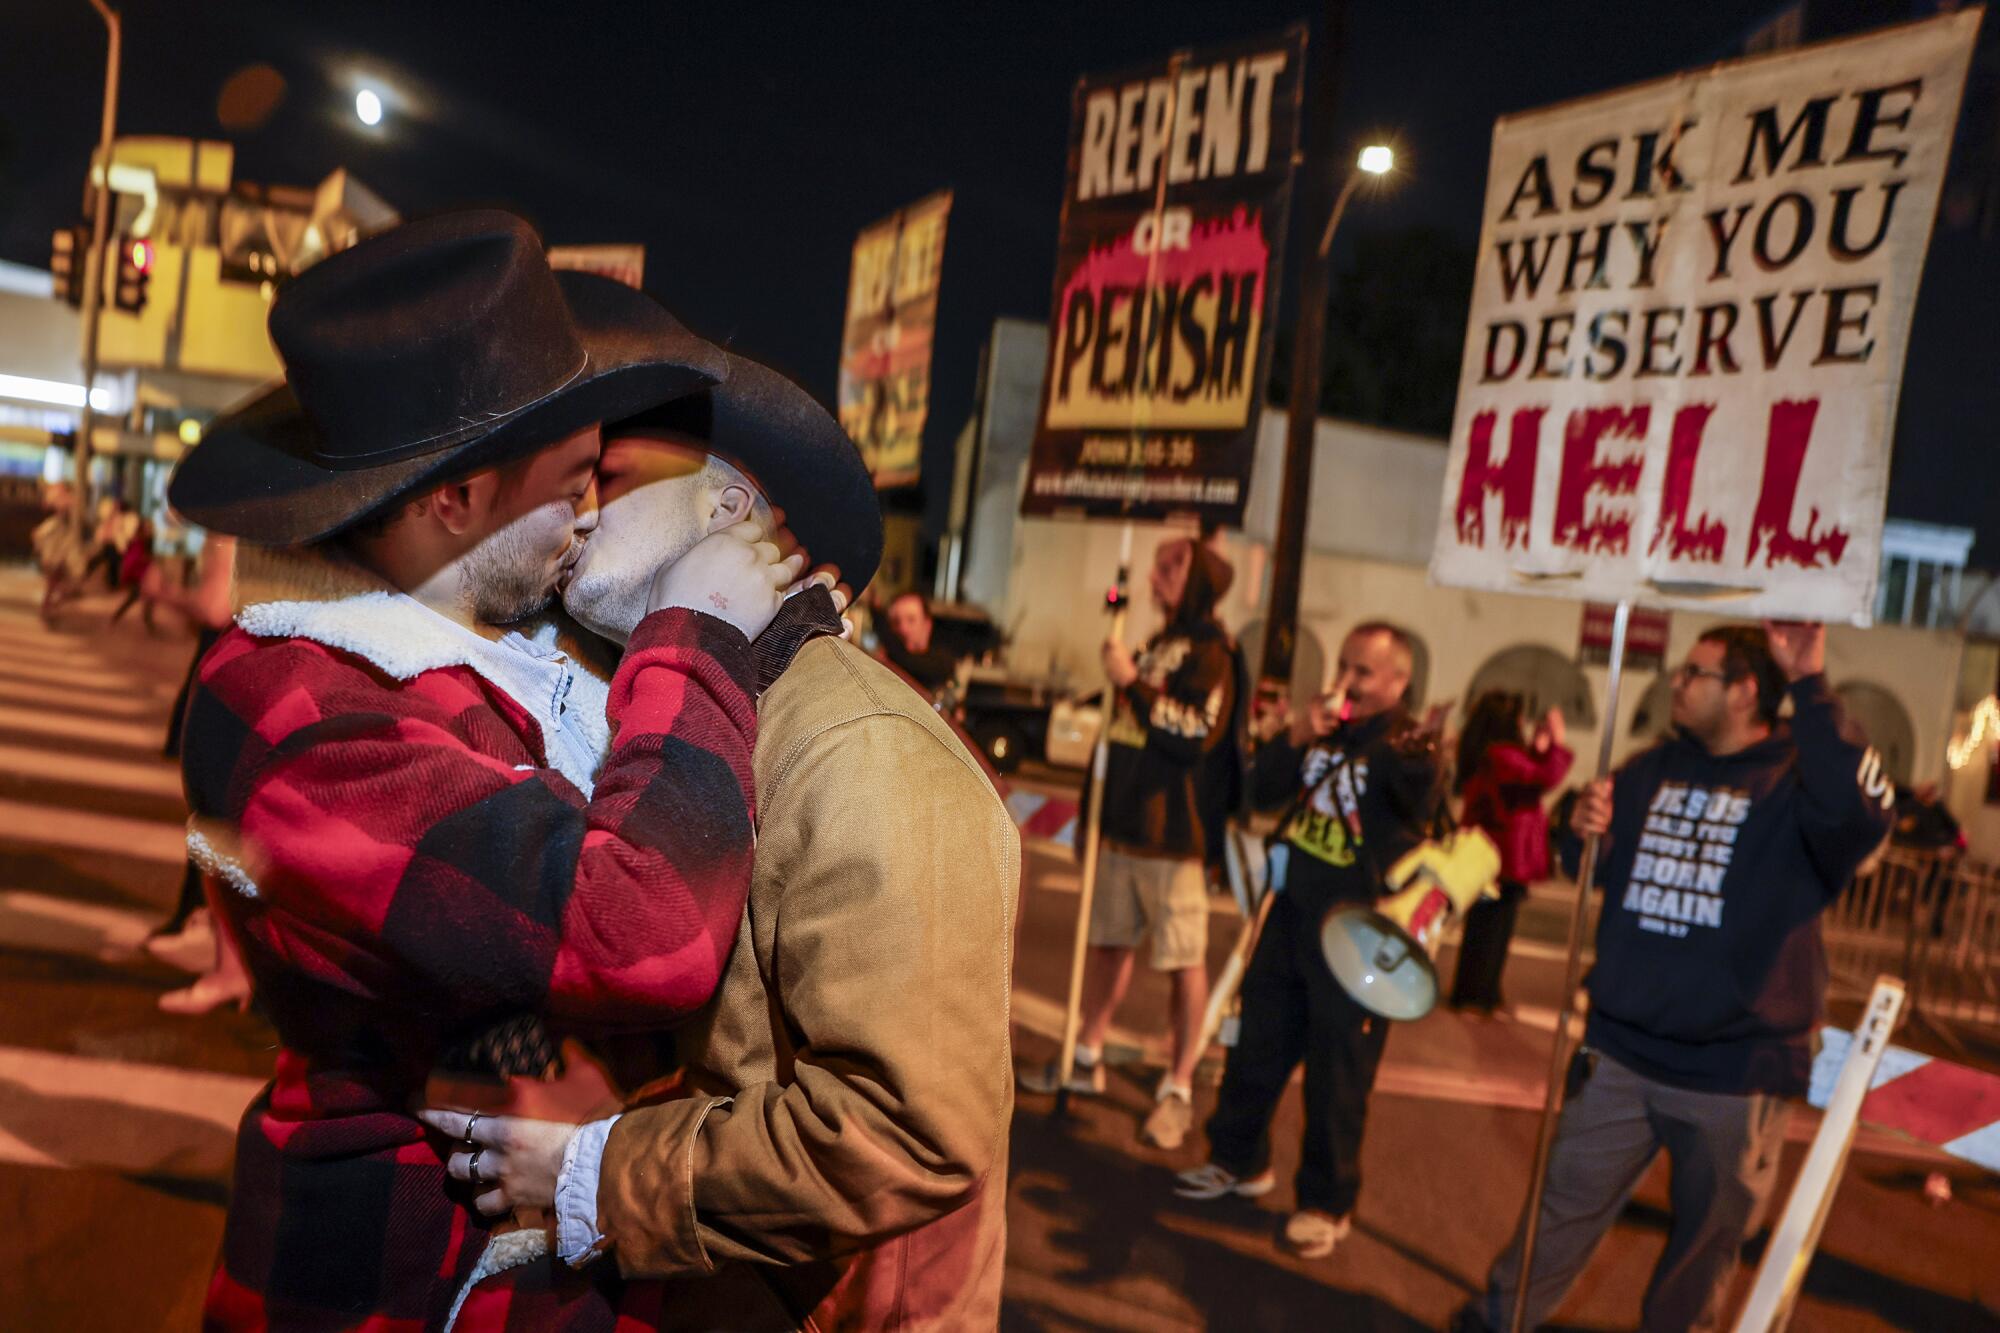 Cowboys engage in a long kiss in front of religious protesters near the entrance of the West Hollywood Halloween Carnaval. 